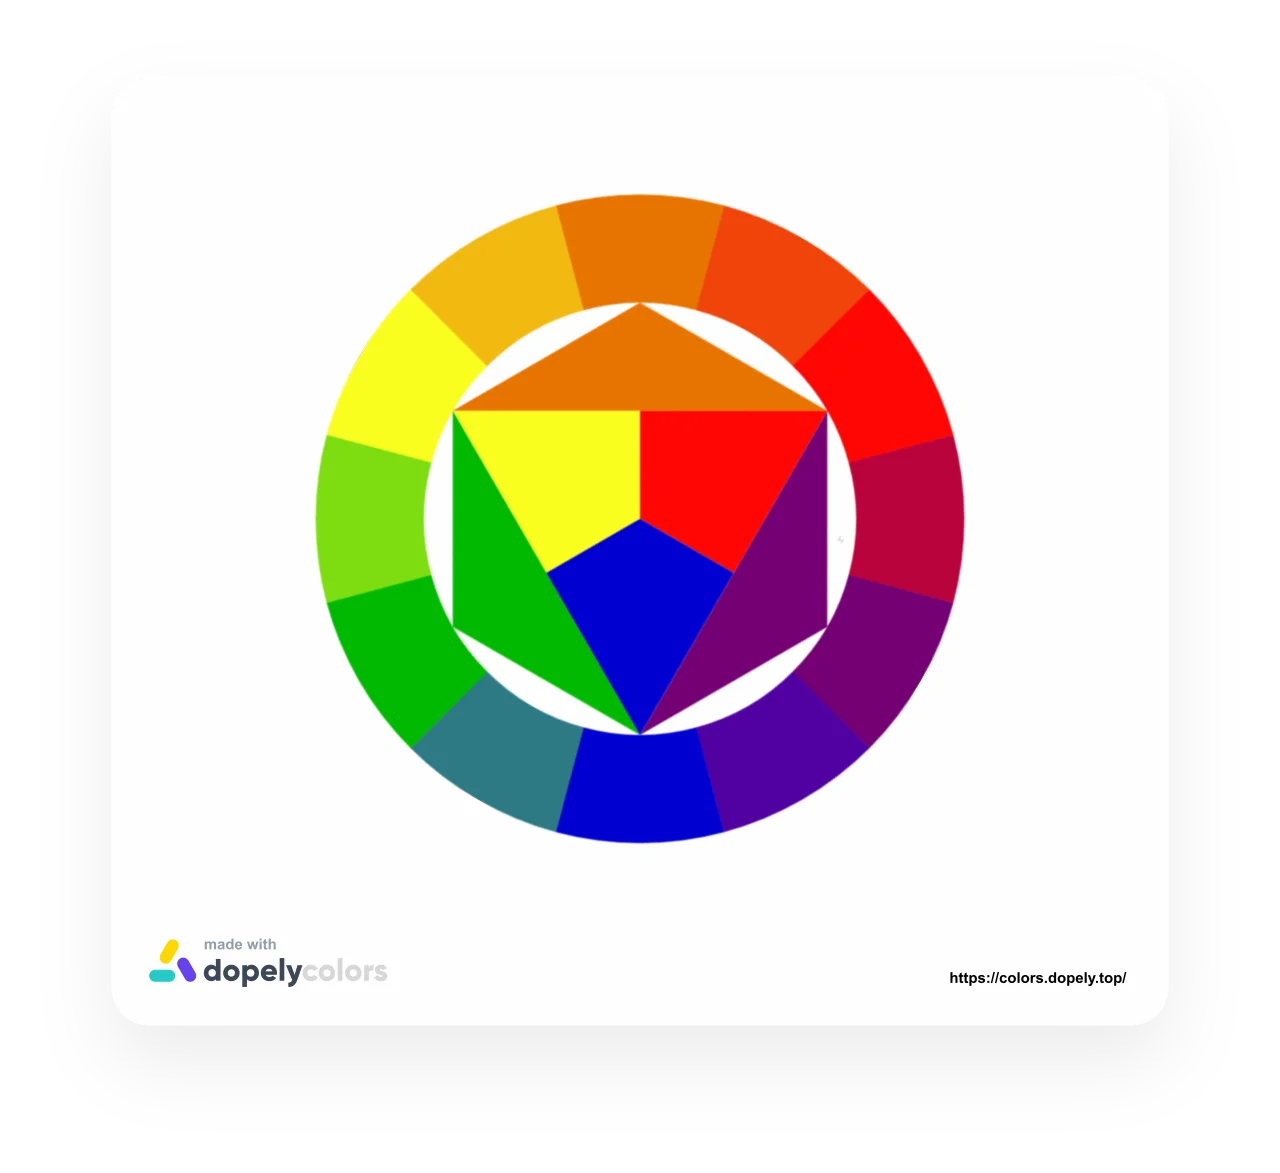 Primary colors, secondary colors and third colors mixing guide on the color wheel